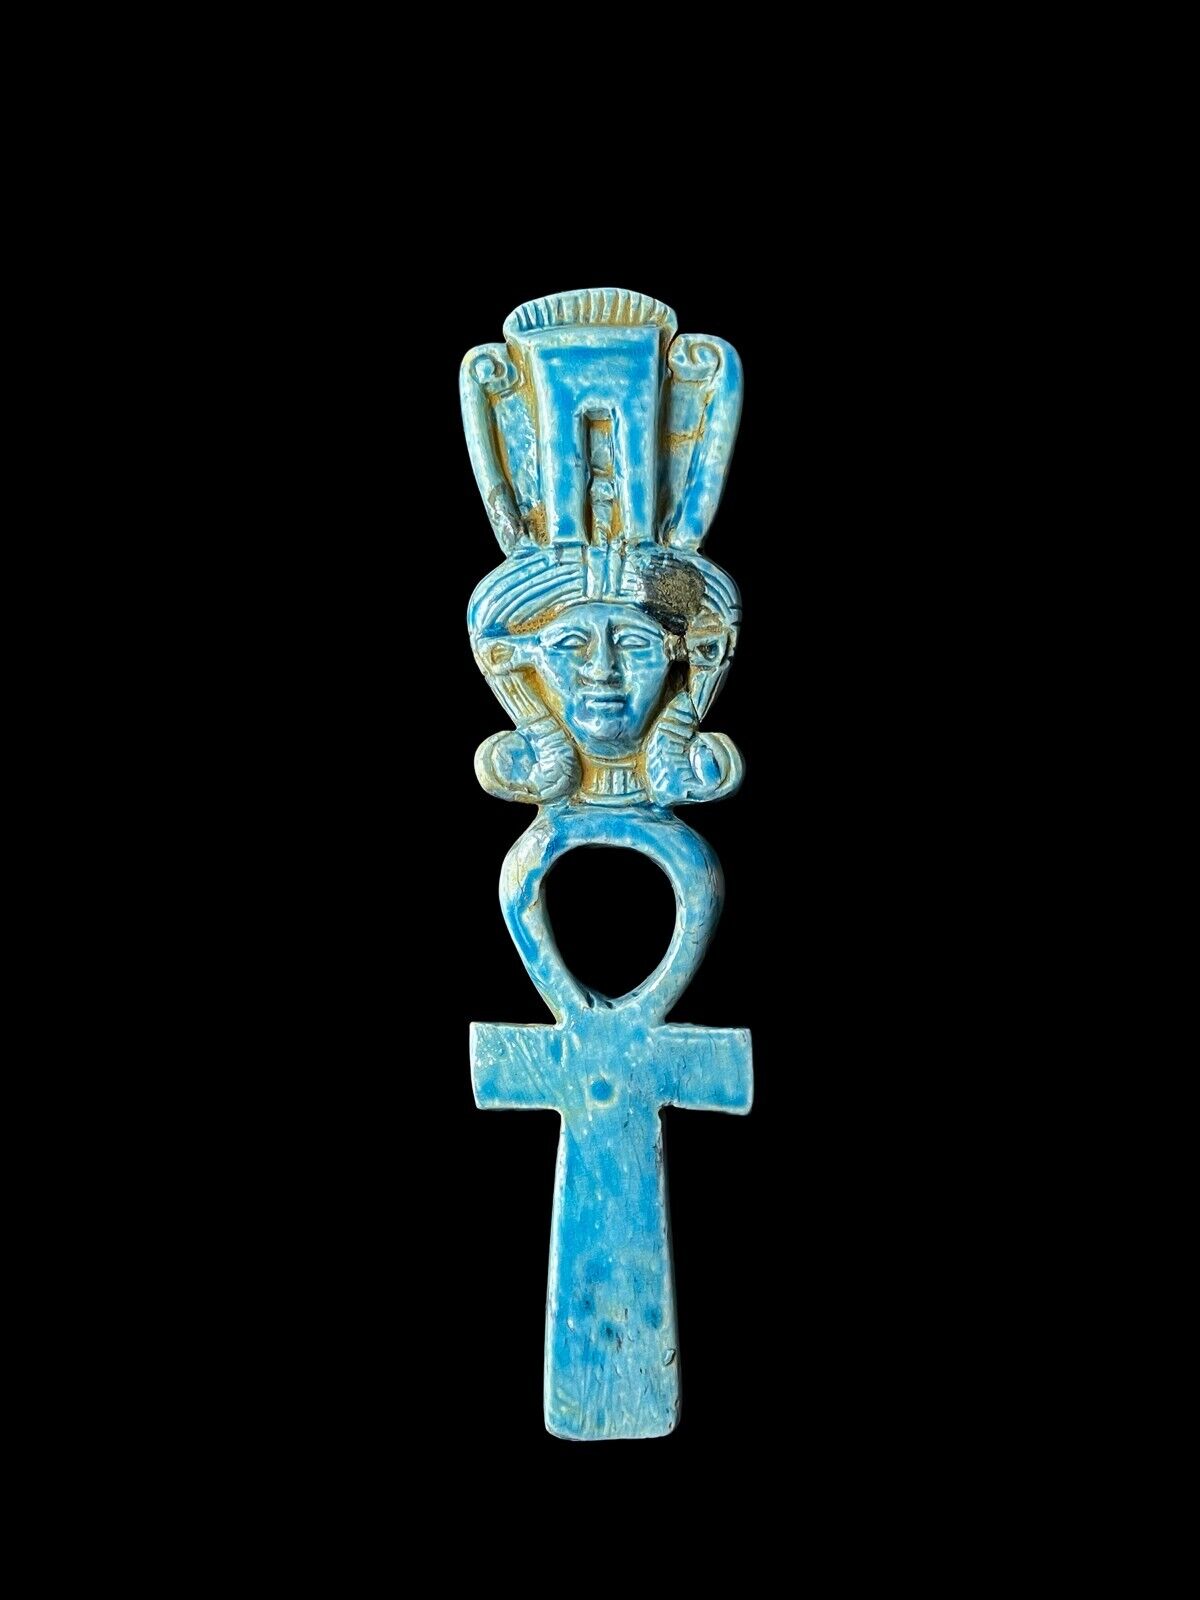 Cross Key of Life with Goddess Hathor in a Rare Form from Ancient Egypt History